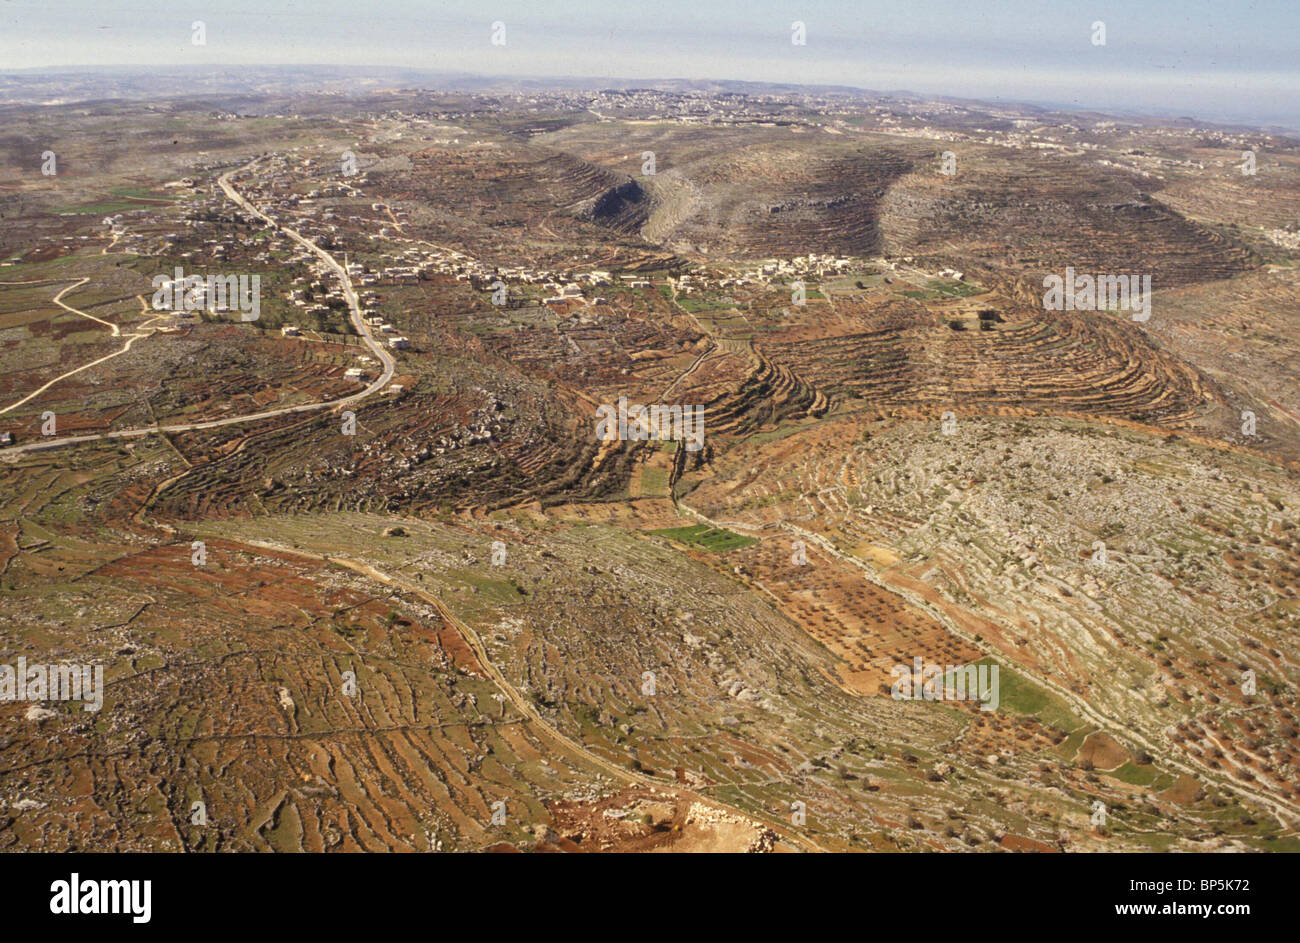 4701. THE HILLCOUNTRY OF SAMARIA NORTH OF JERUSALEM ALOTED TO THE TRIBE OF BENJAMIN Stock Photo